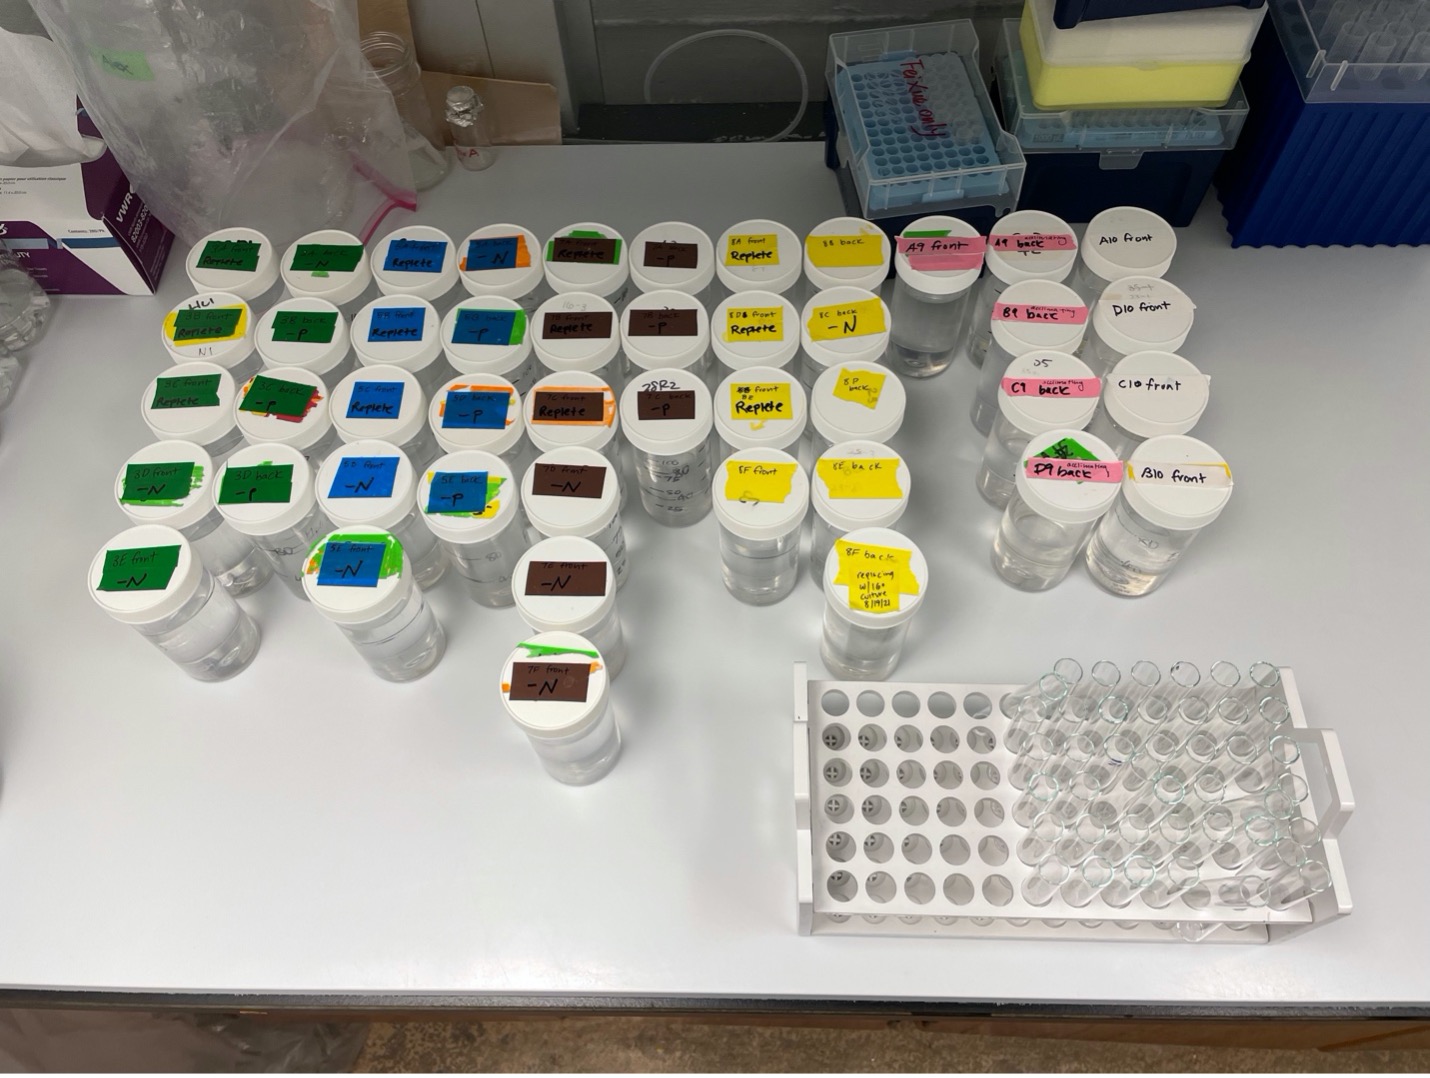 Preparing our cultures for in vivo testing! Several times a week, we remove all the cultures from the thermal block and rearrange them under a sterile lab hood. I pour a sample of each culture into a test tube where I run it through a fluorometer to test for the amount of chlorophyll in the sample. We then use the measurements to calculate the growth rate of our cultures. 